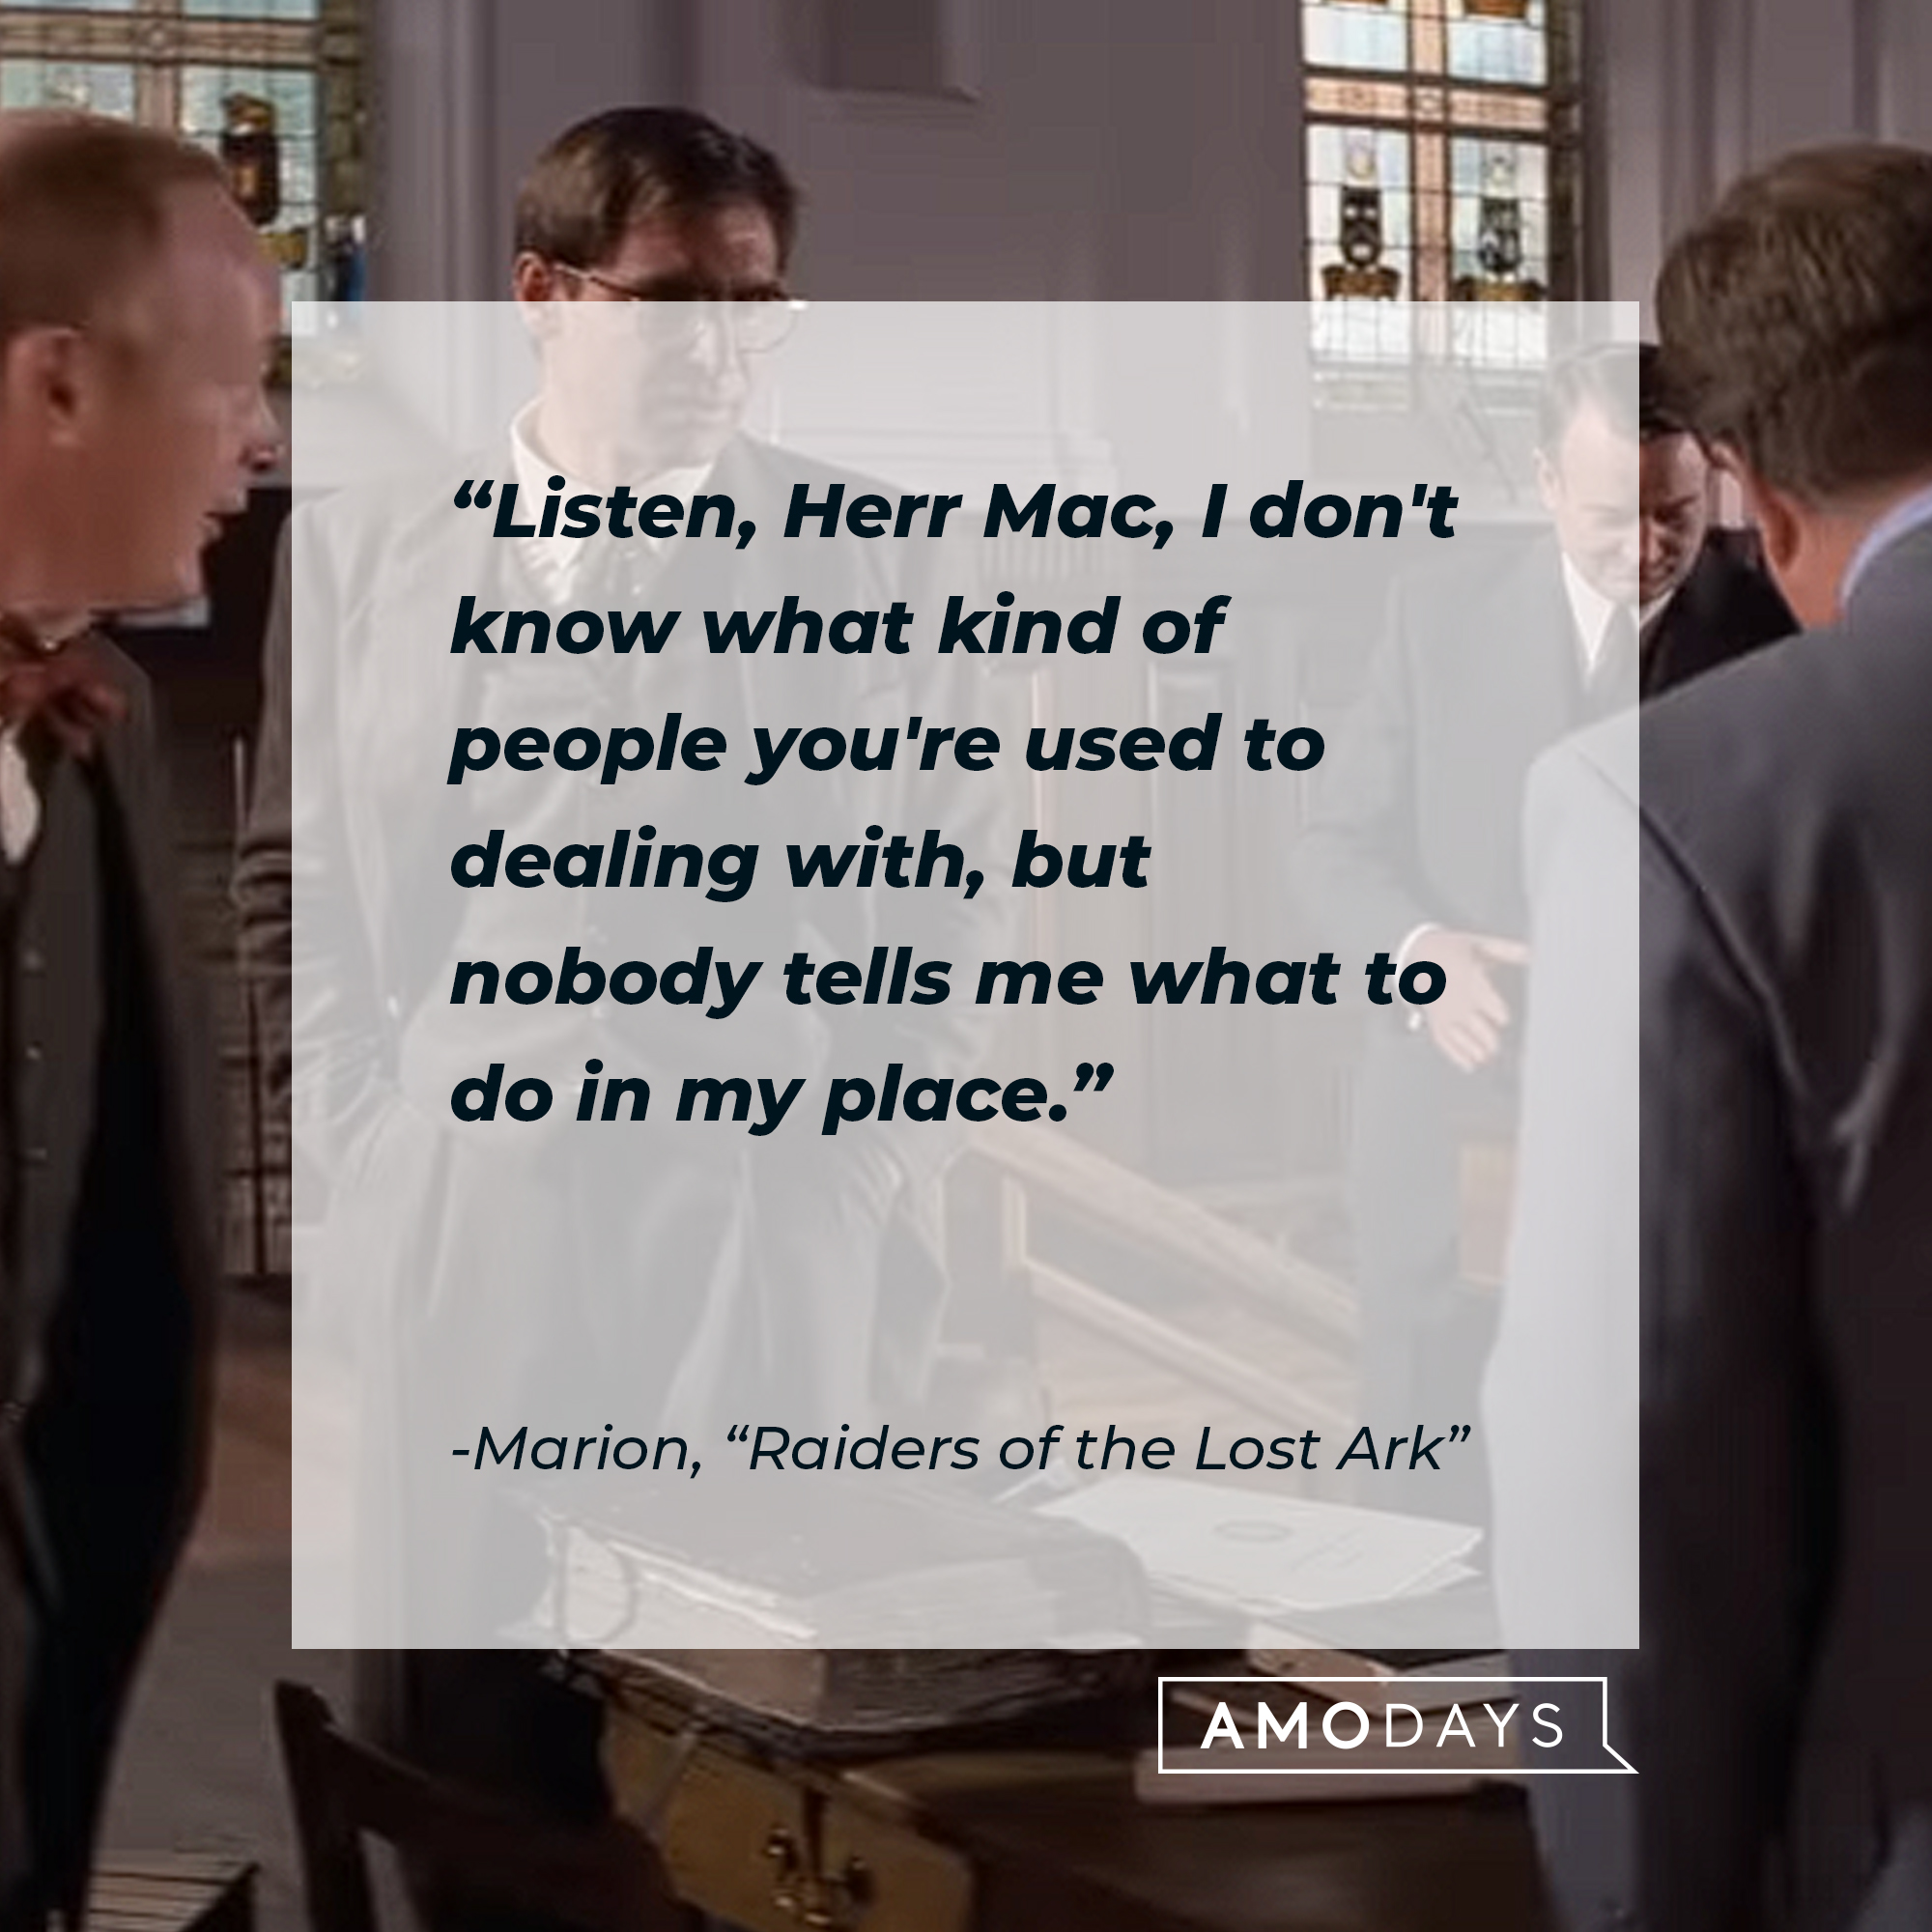 A photo of Indiana Jones with the quote, "Listen, Herr Mac, I don't know what kind of people you're used to dealing with, but nobody tells me what to do in my place." | Source: YouTube/paramountmovies